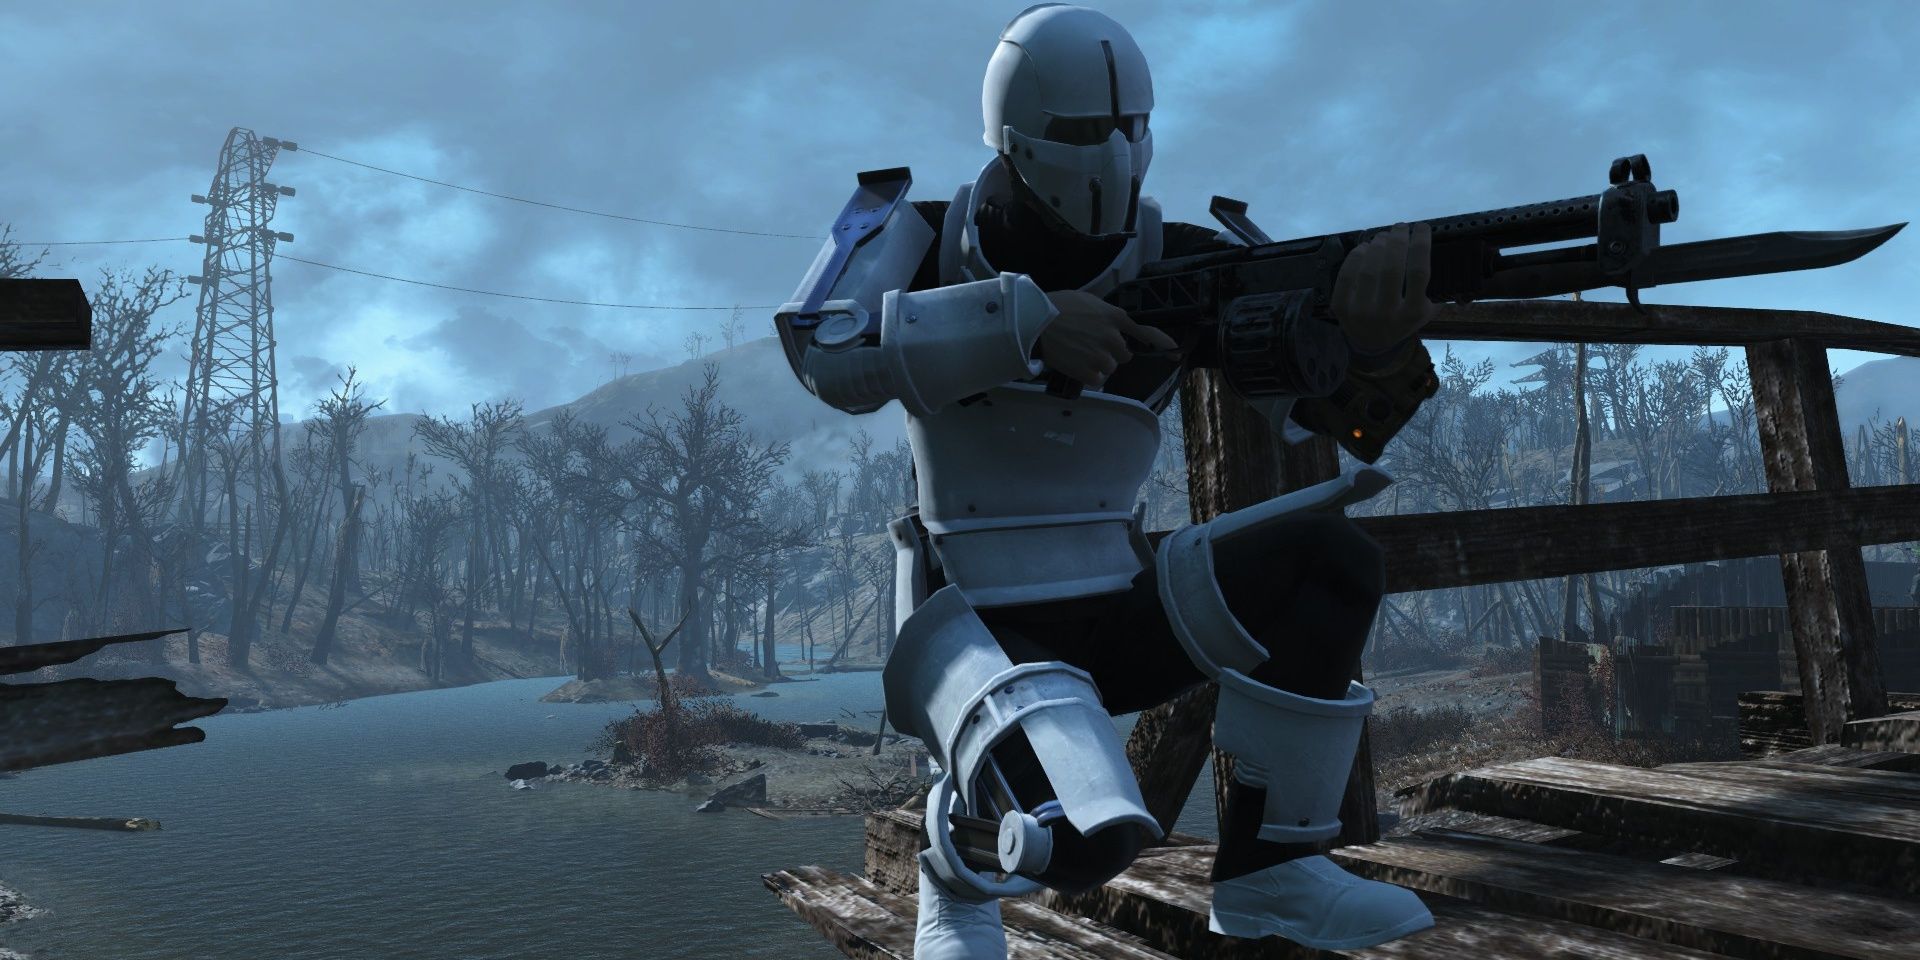 Character in stormtrooper-esque Synth armor in Fallout 4 aiming a gun.